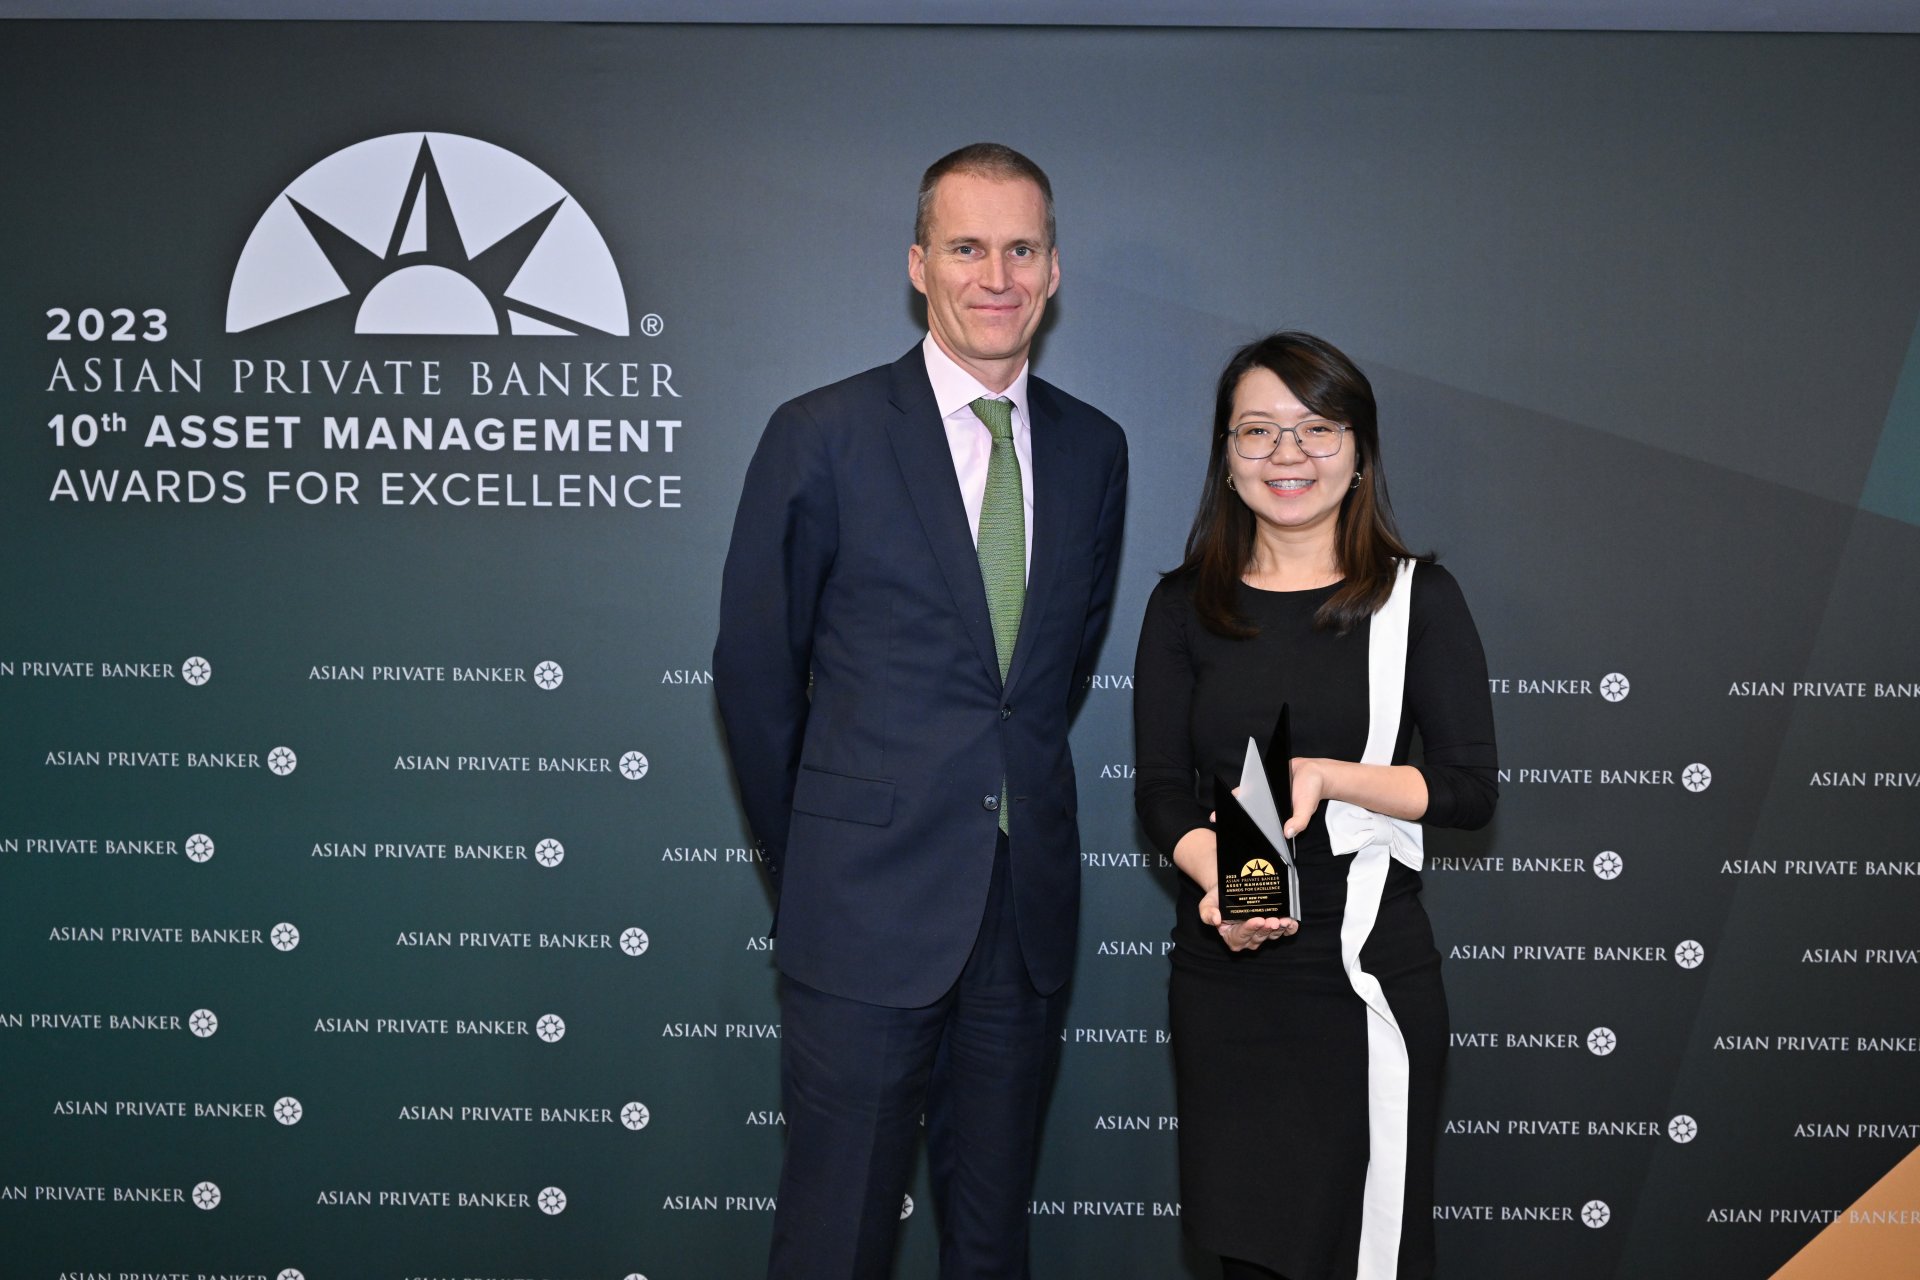 Asian Private Banker's Best New Fund - Equity for 2023 is Federated Hermes. Accepting the award is Jake Nilsson and MeiLin Tan.